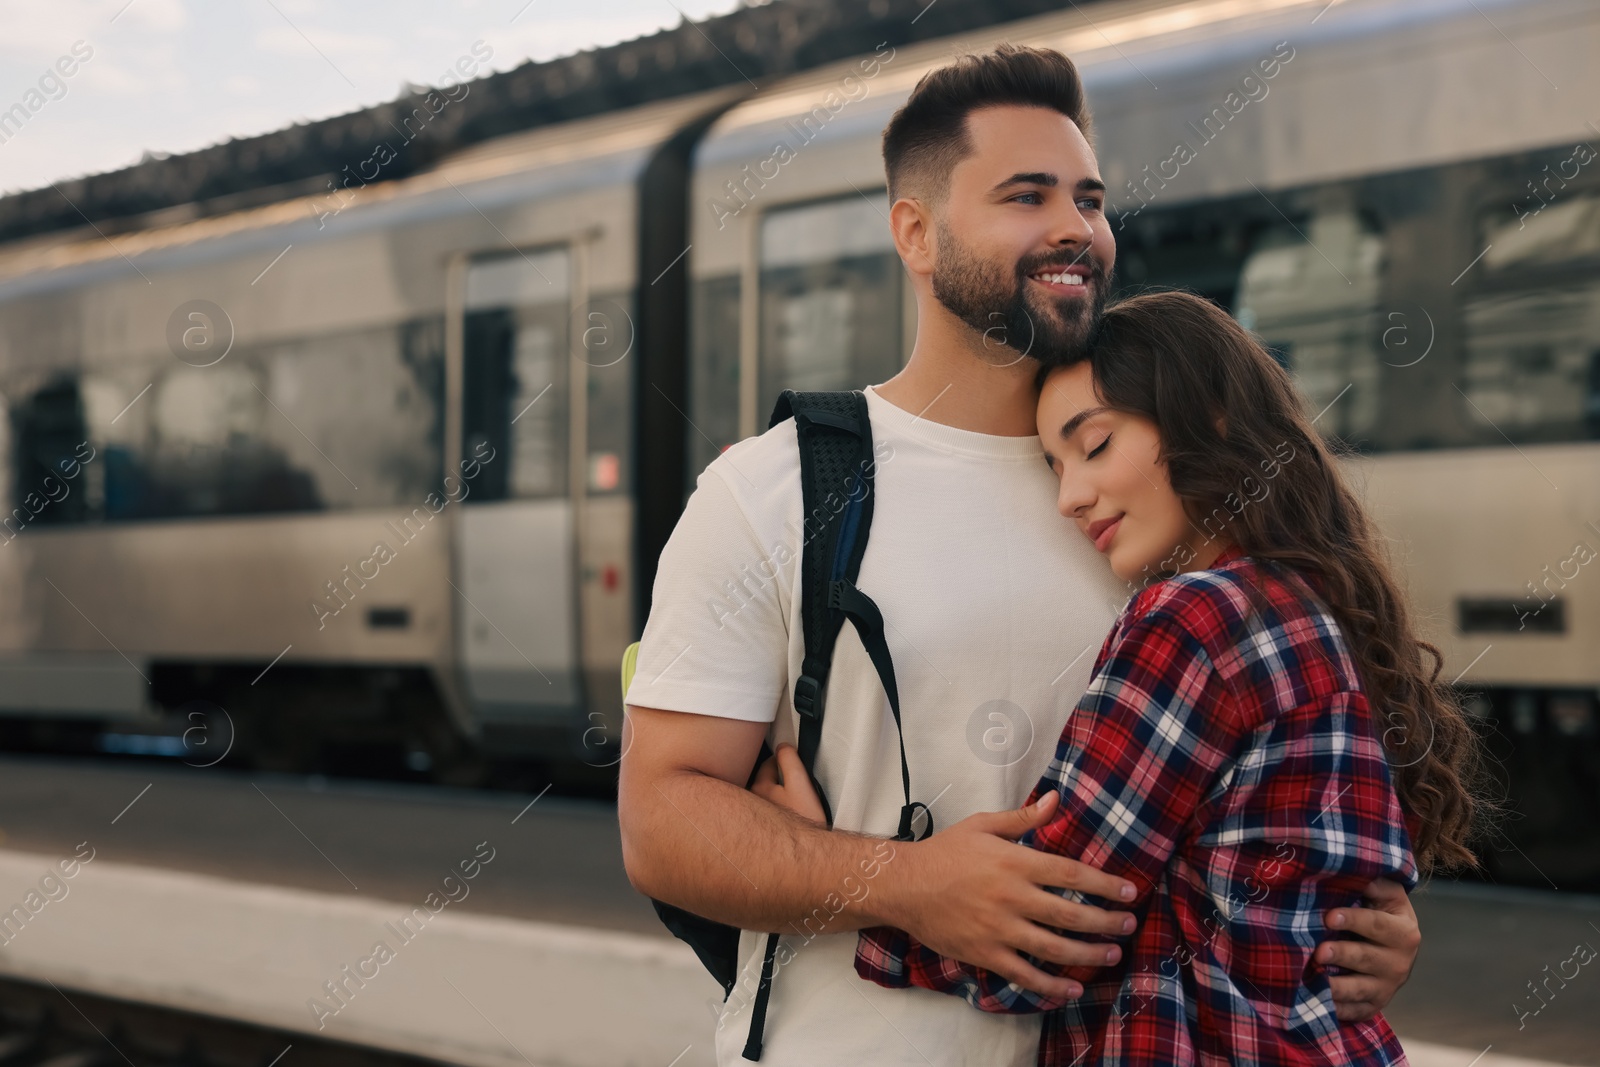 Photo of Long-distance relationship. Beautiful couple hugging on platform of railway station, space for text